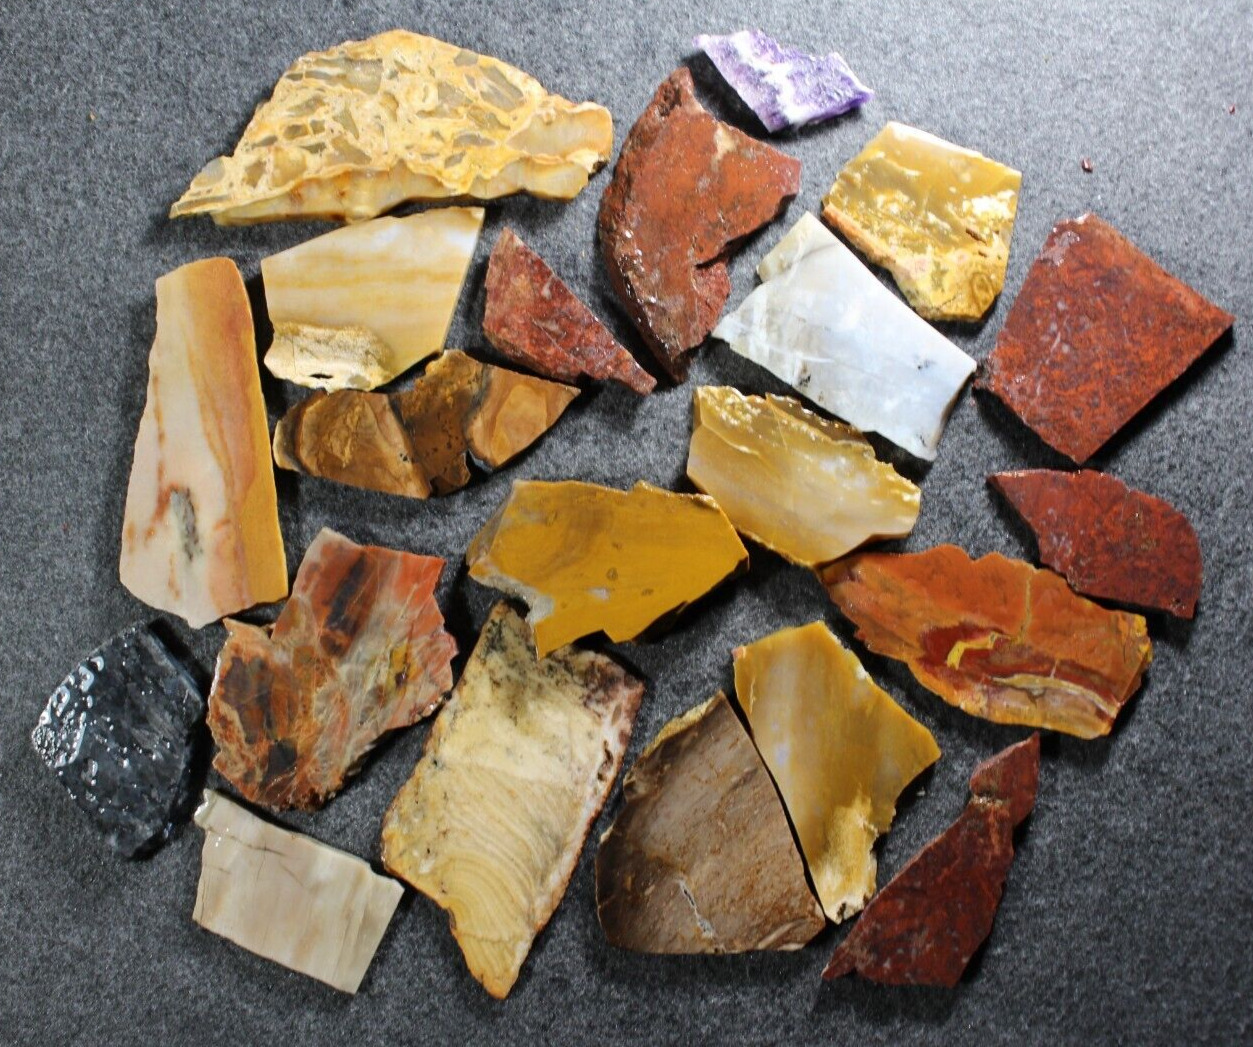 PJ: Mixed Lot of Slabs - Jasper, Agate and More  2 Lbs